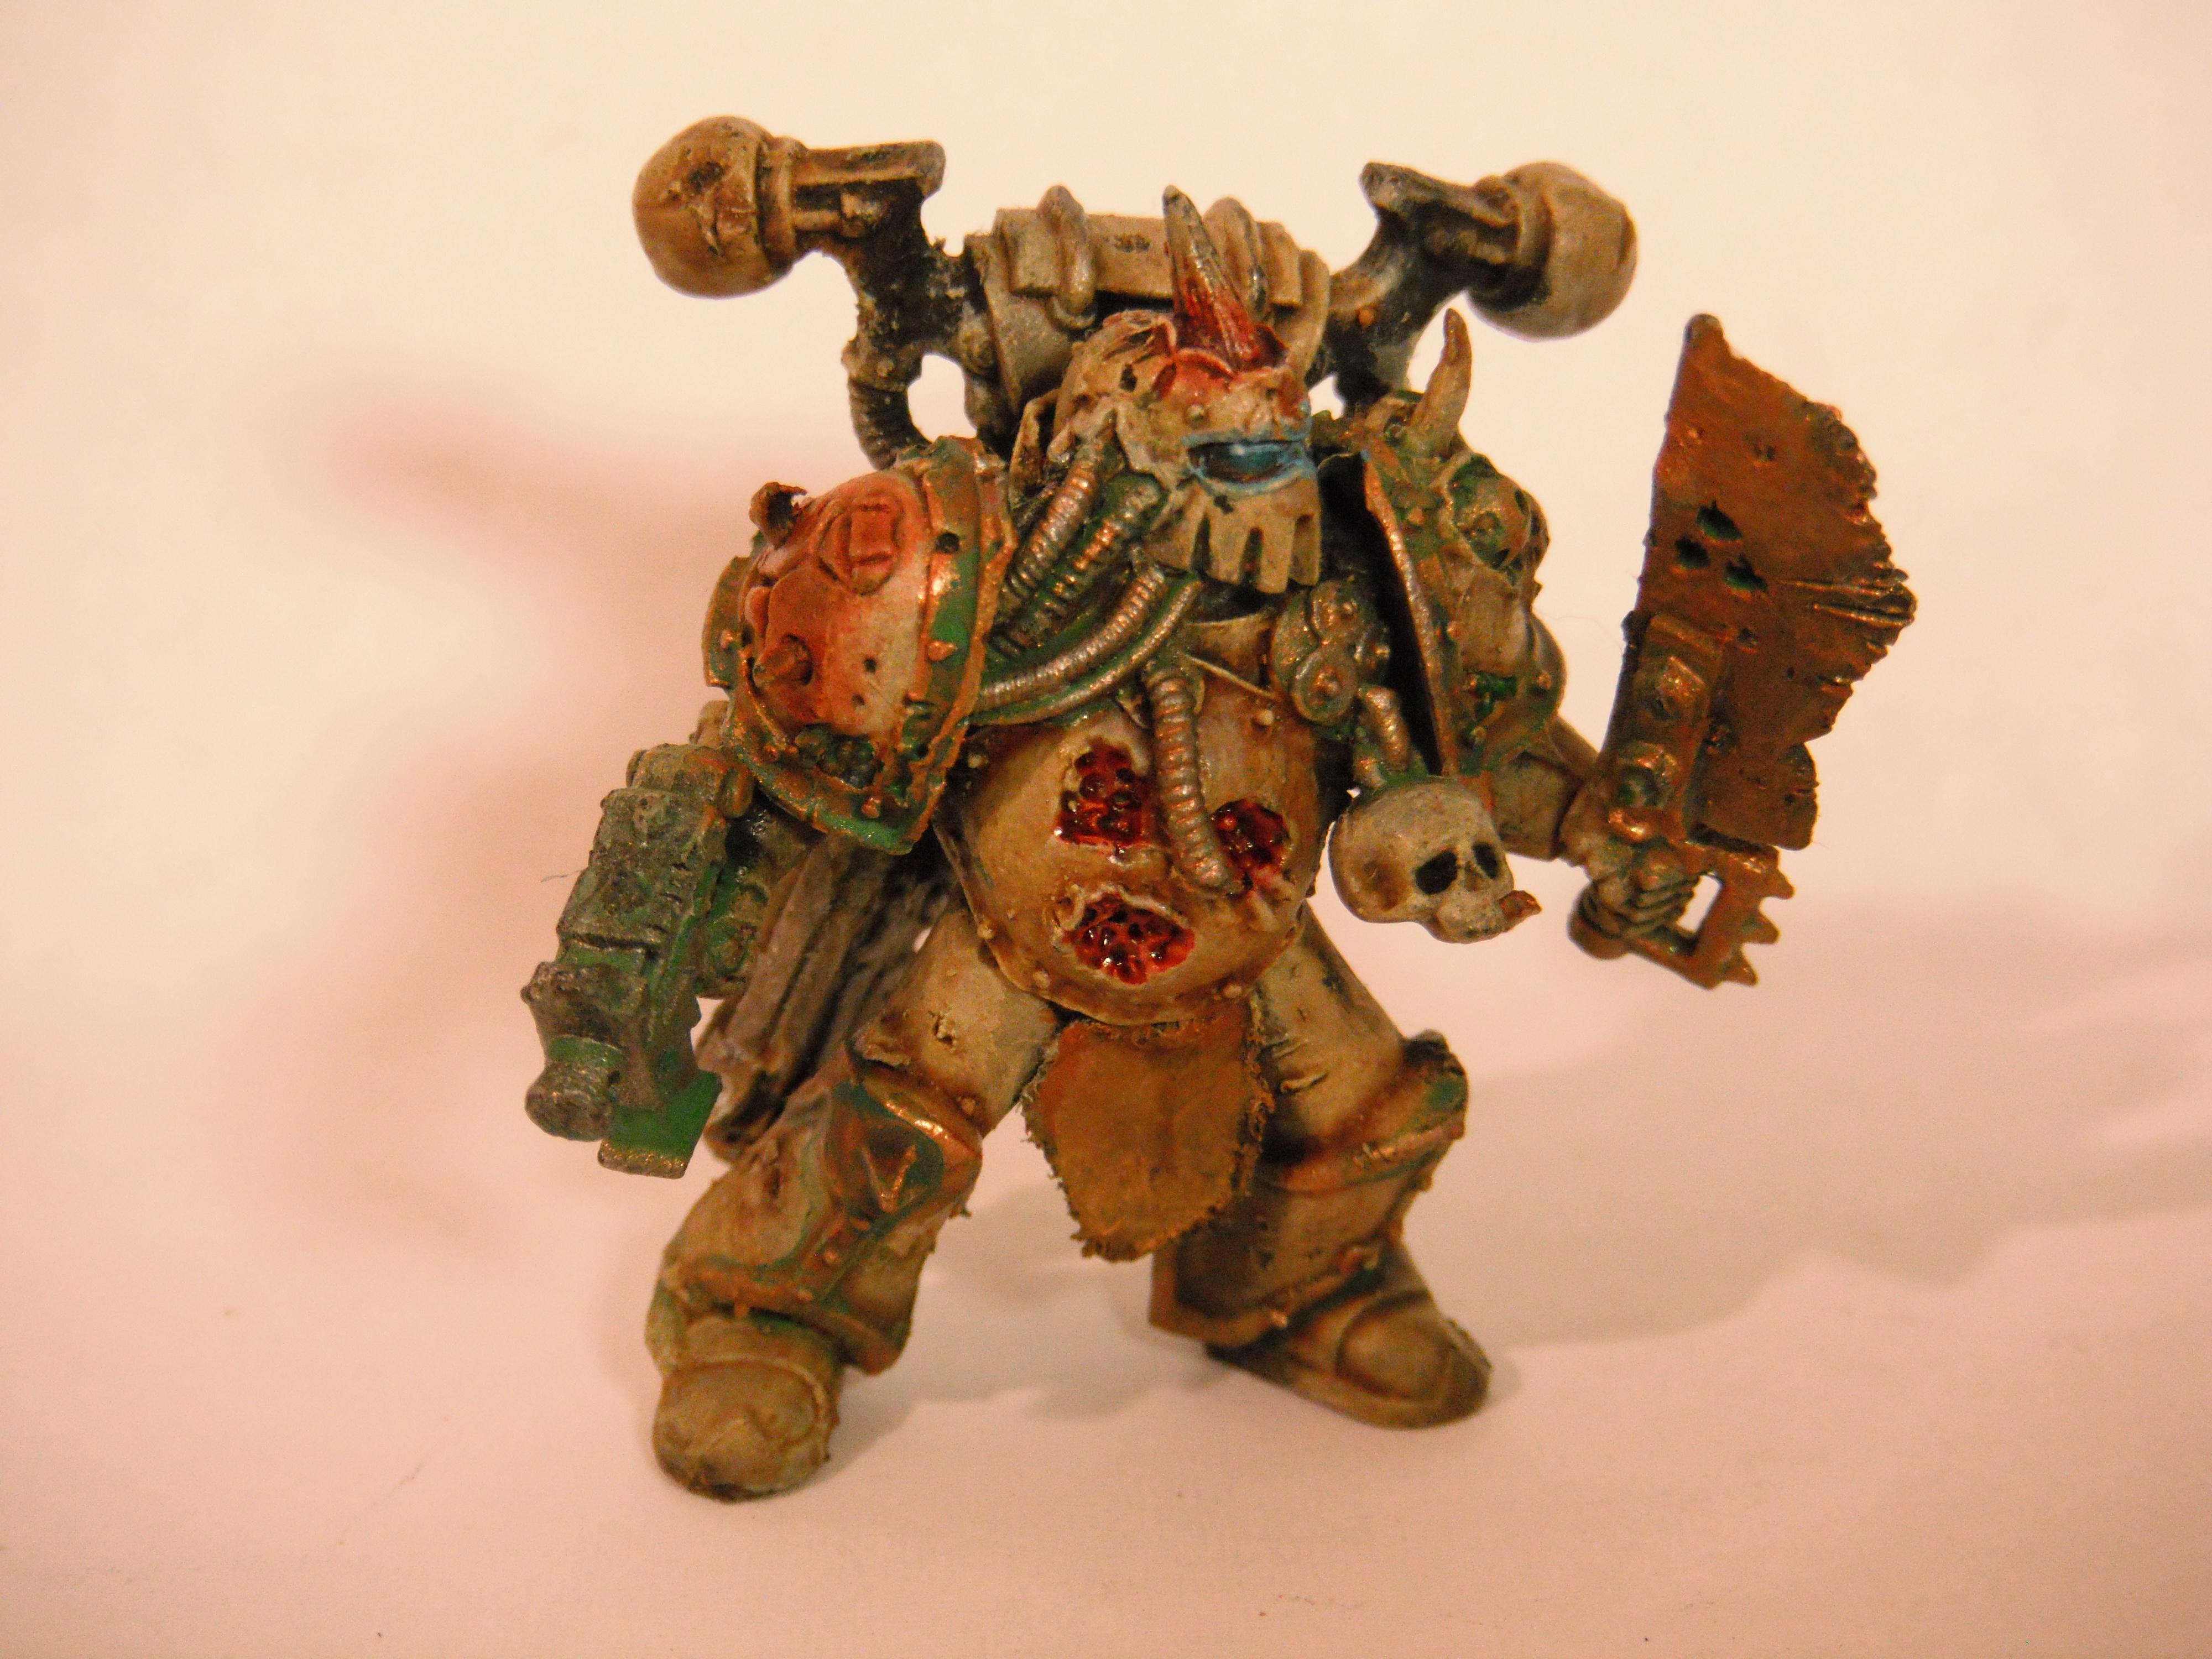 40k Warhammer 40k, Apostles Of Contagion, Chaos, Chaos Space Marines, Forge World, Nurgle, Plague Marines, The Apostles Of Contagion, Warhammer 40,000